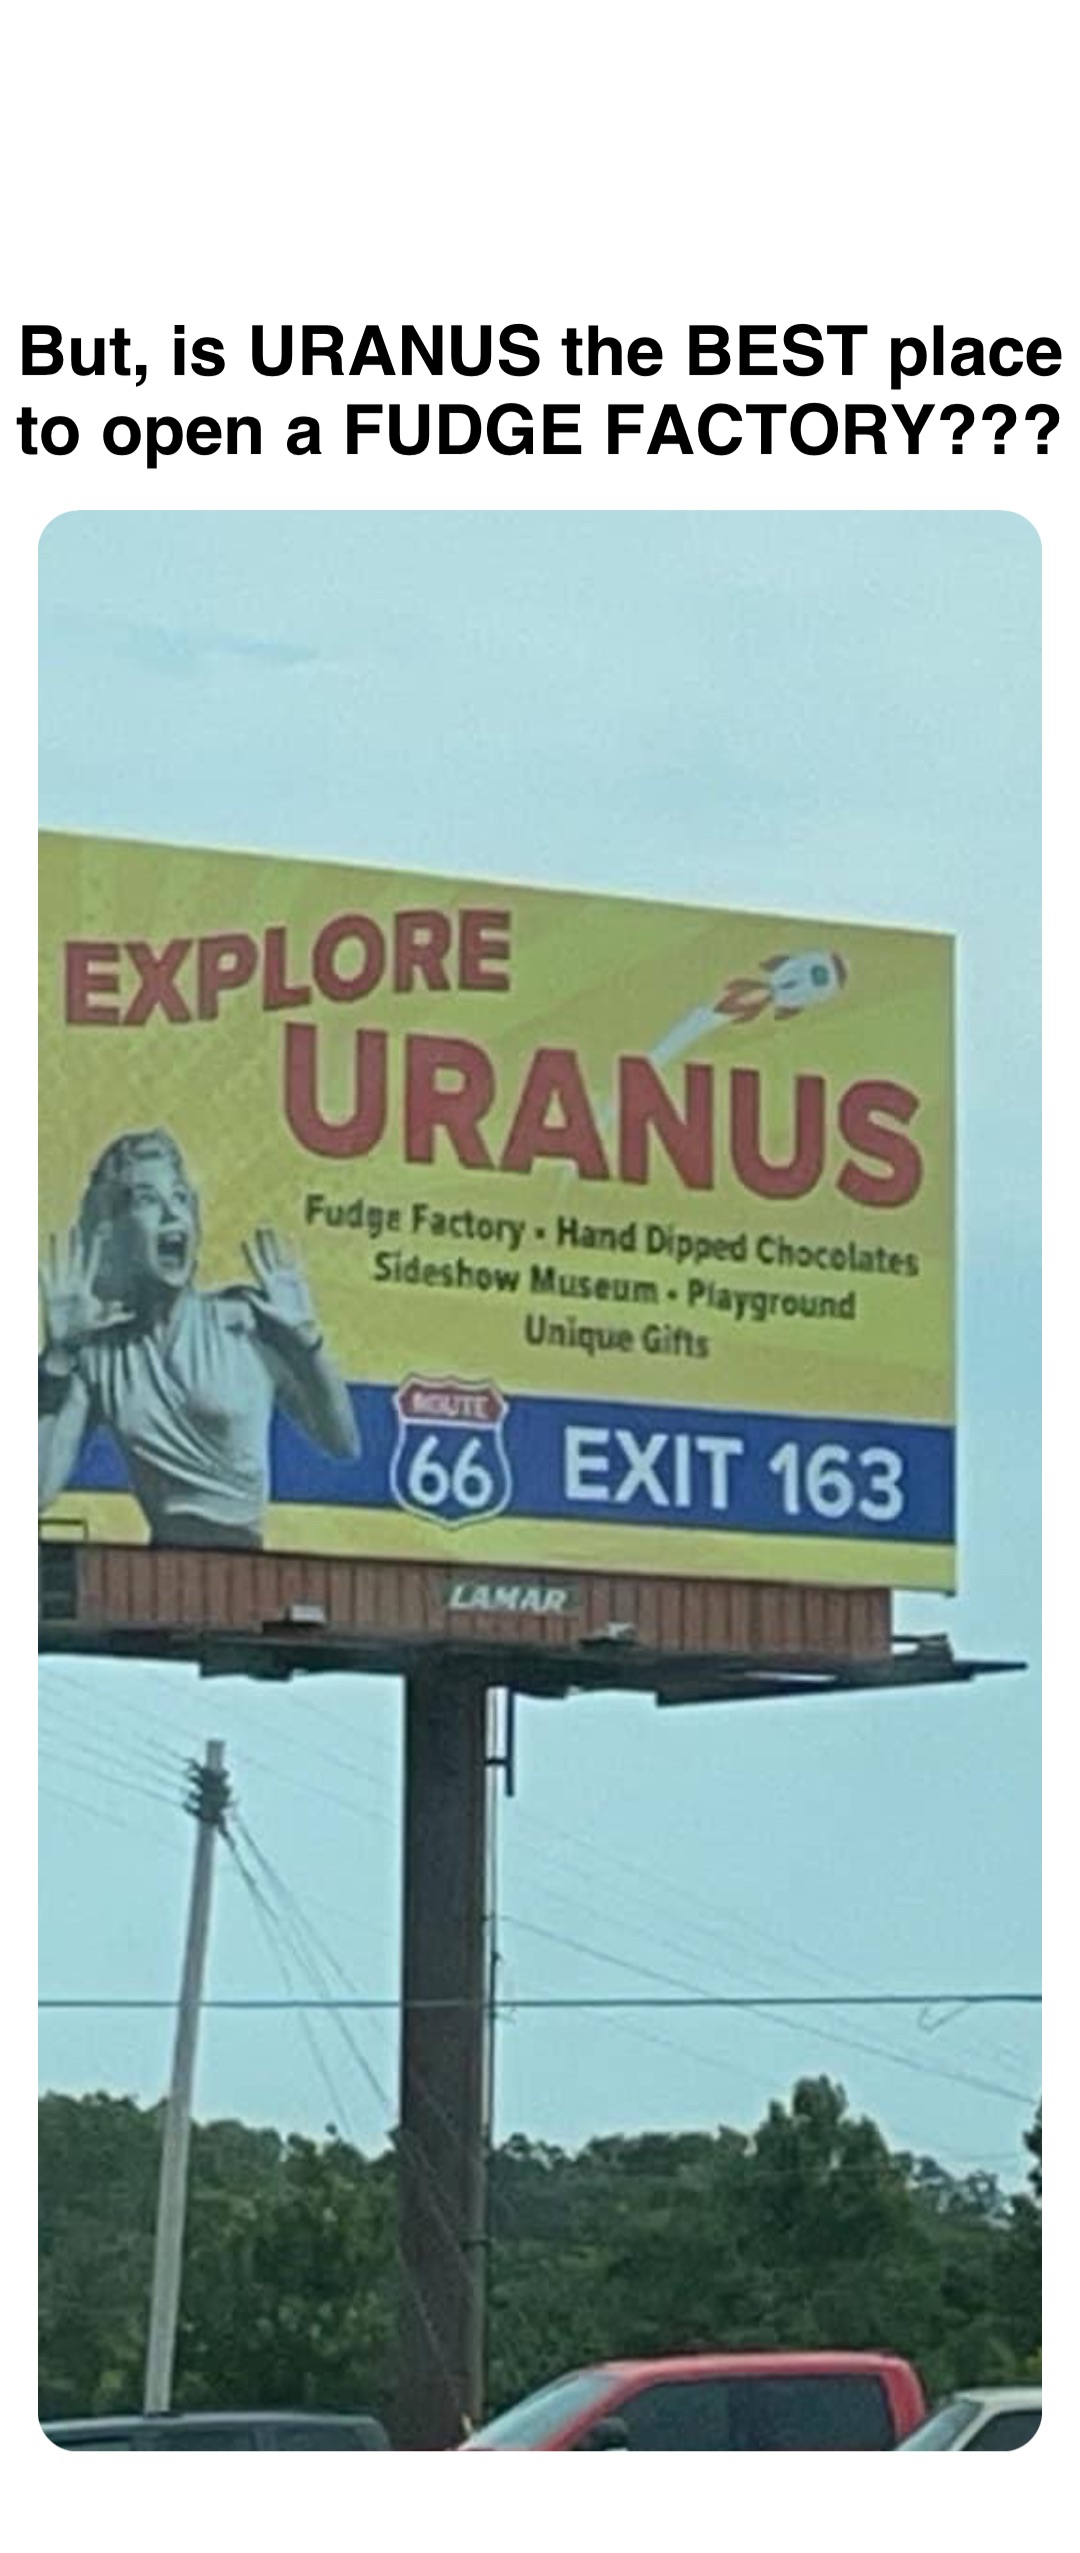 Double tap to edit But, is URANUS the BEST place to open a FUDGE FACTORY???